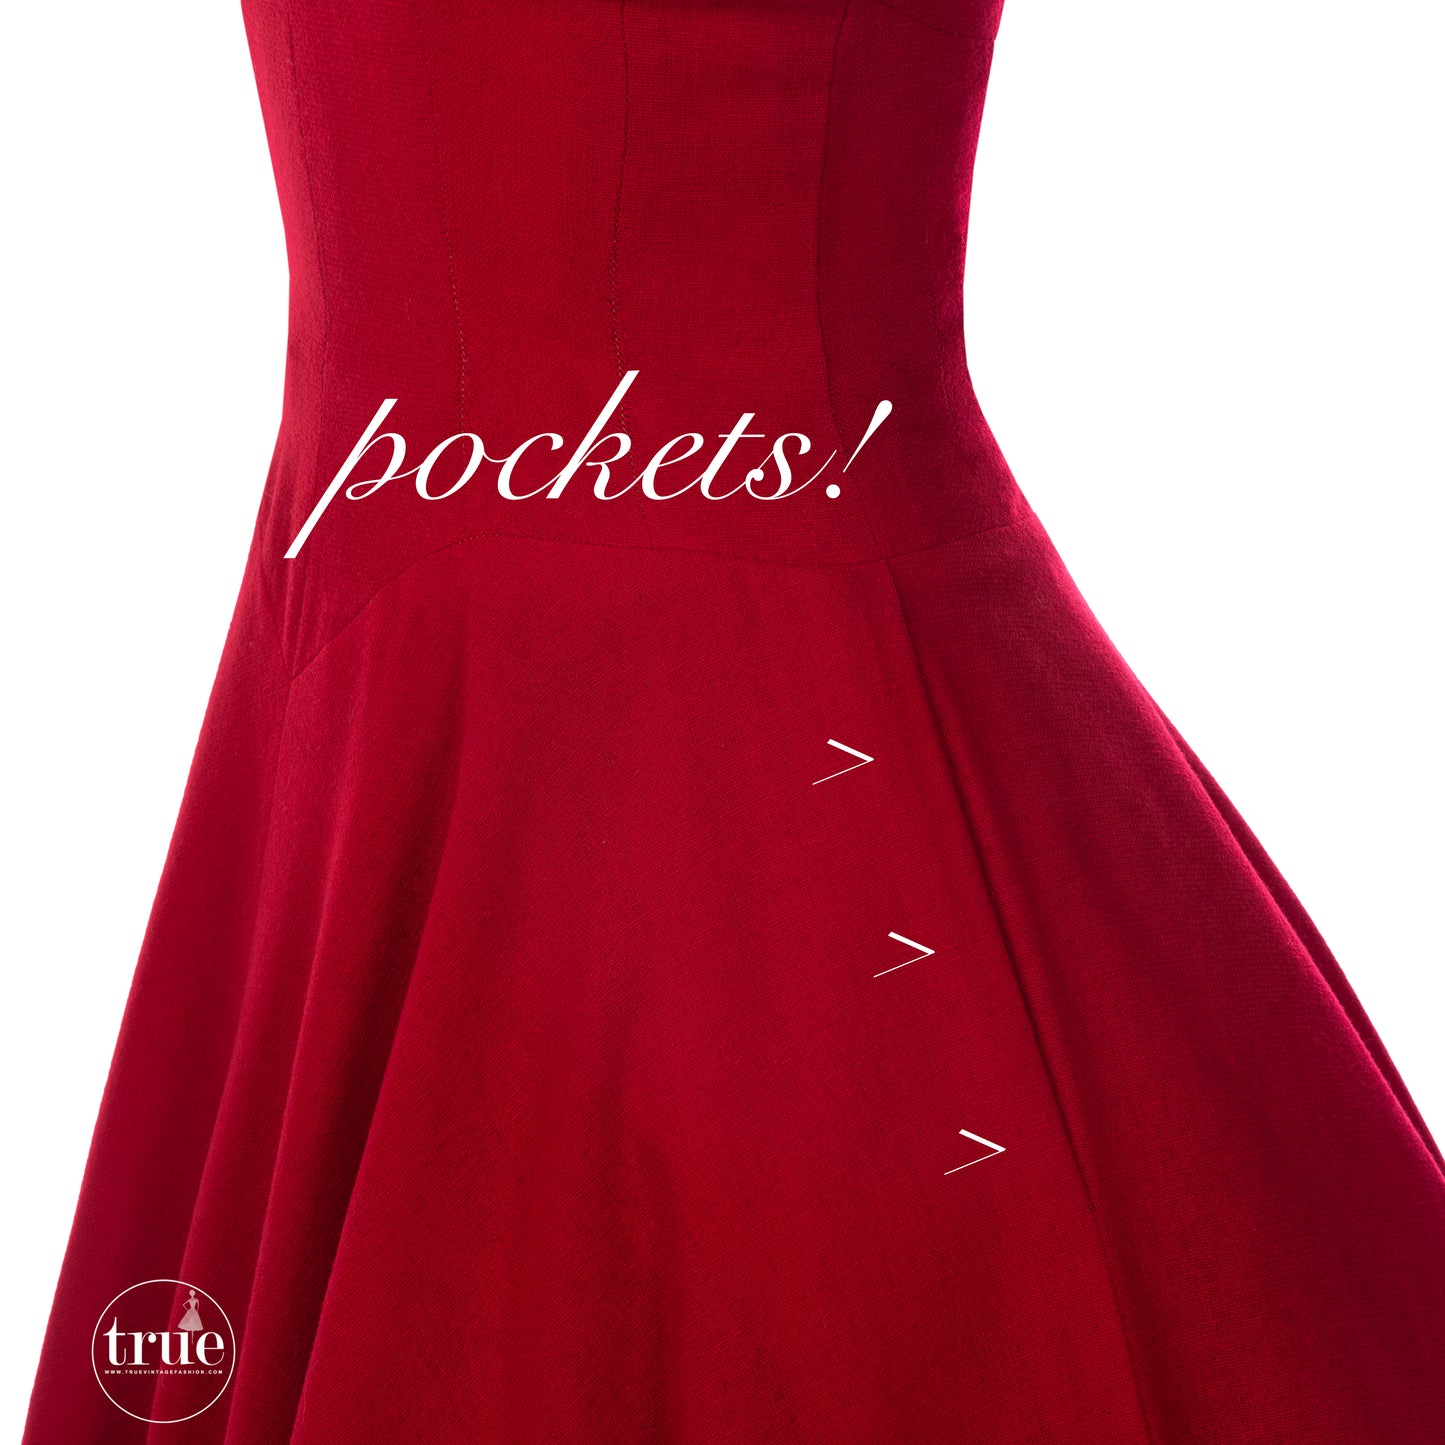 vintage 1950's dress ...classic Lord & Taylor red wool dress